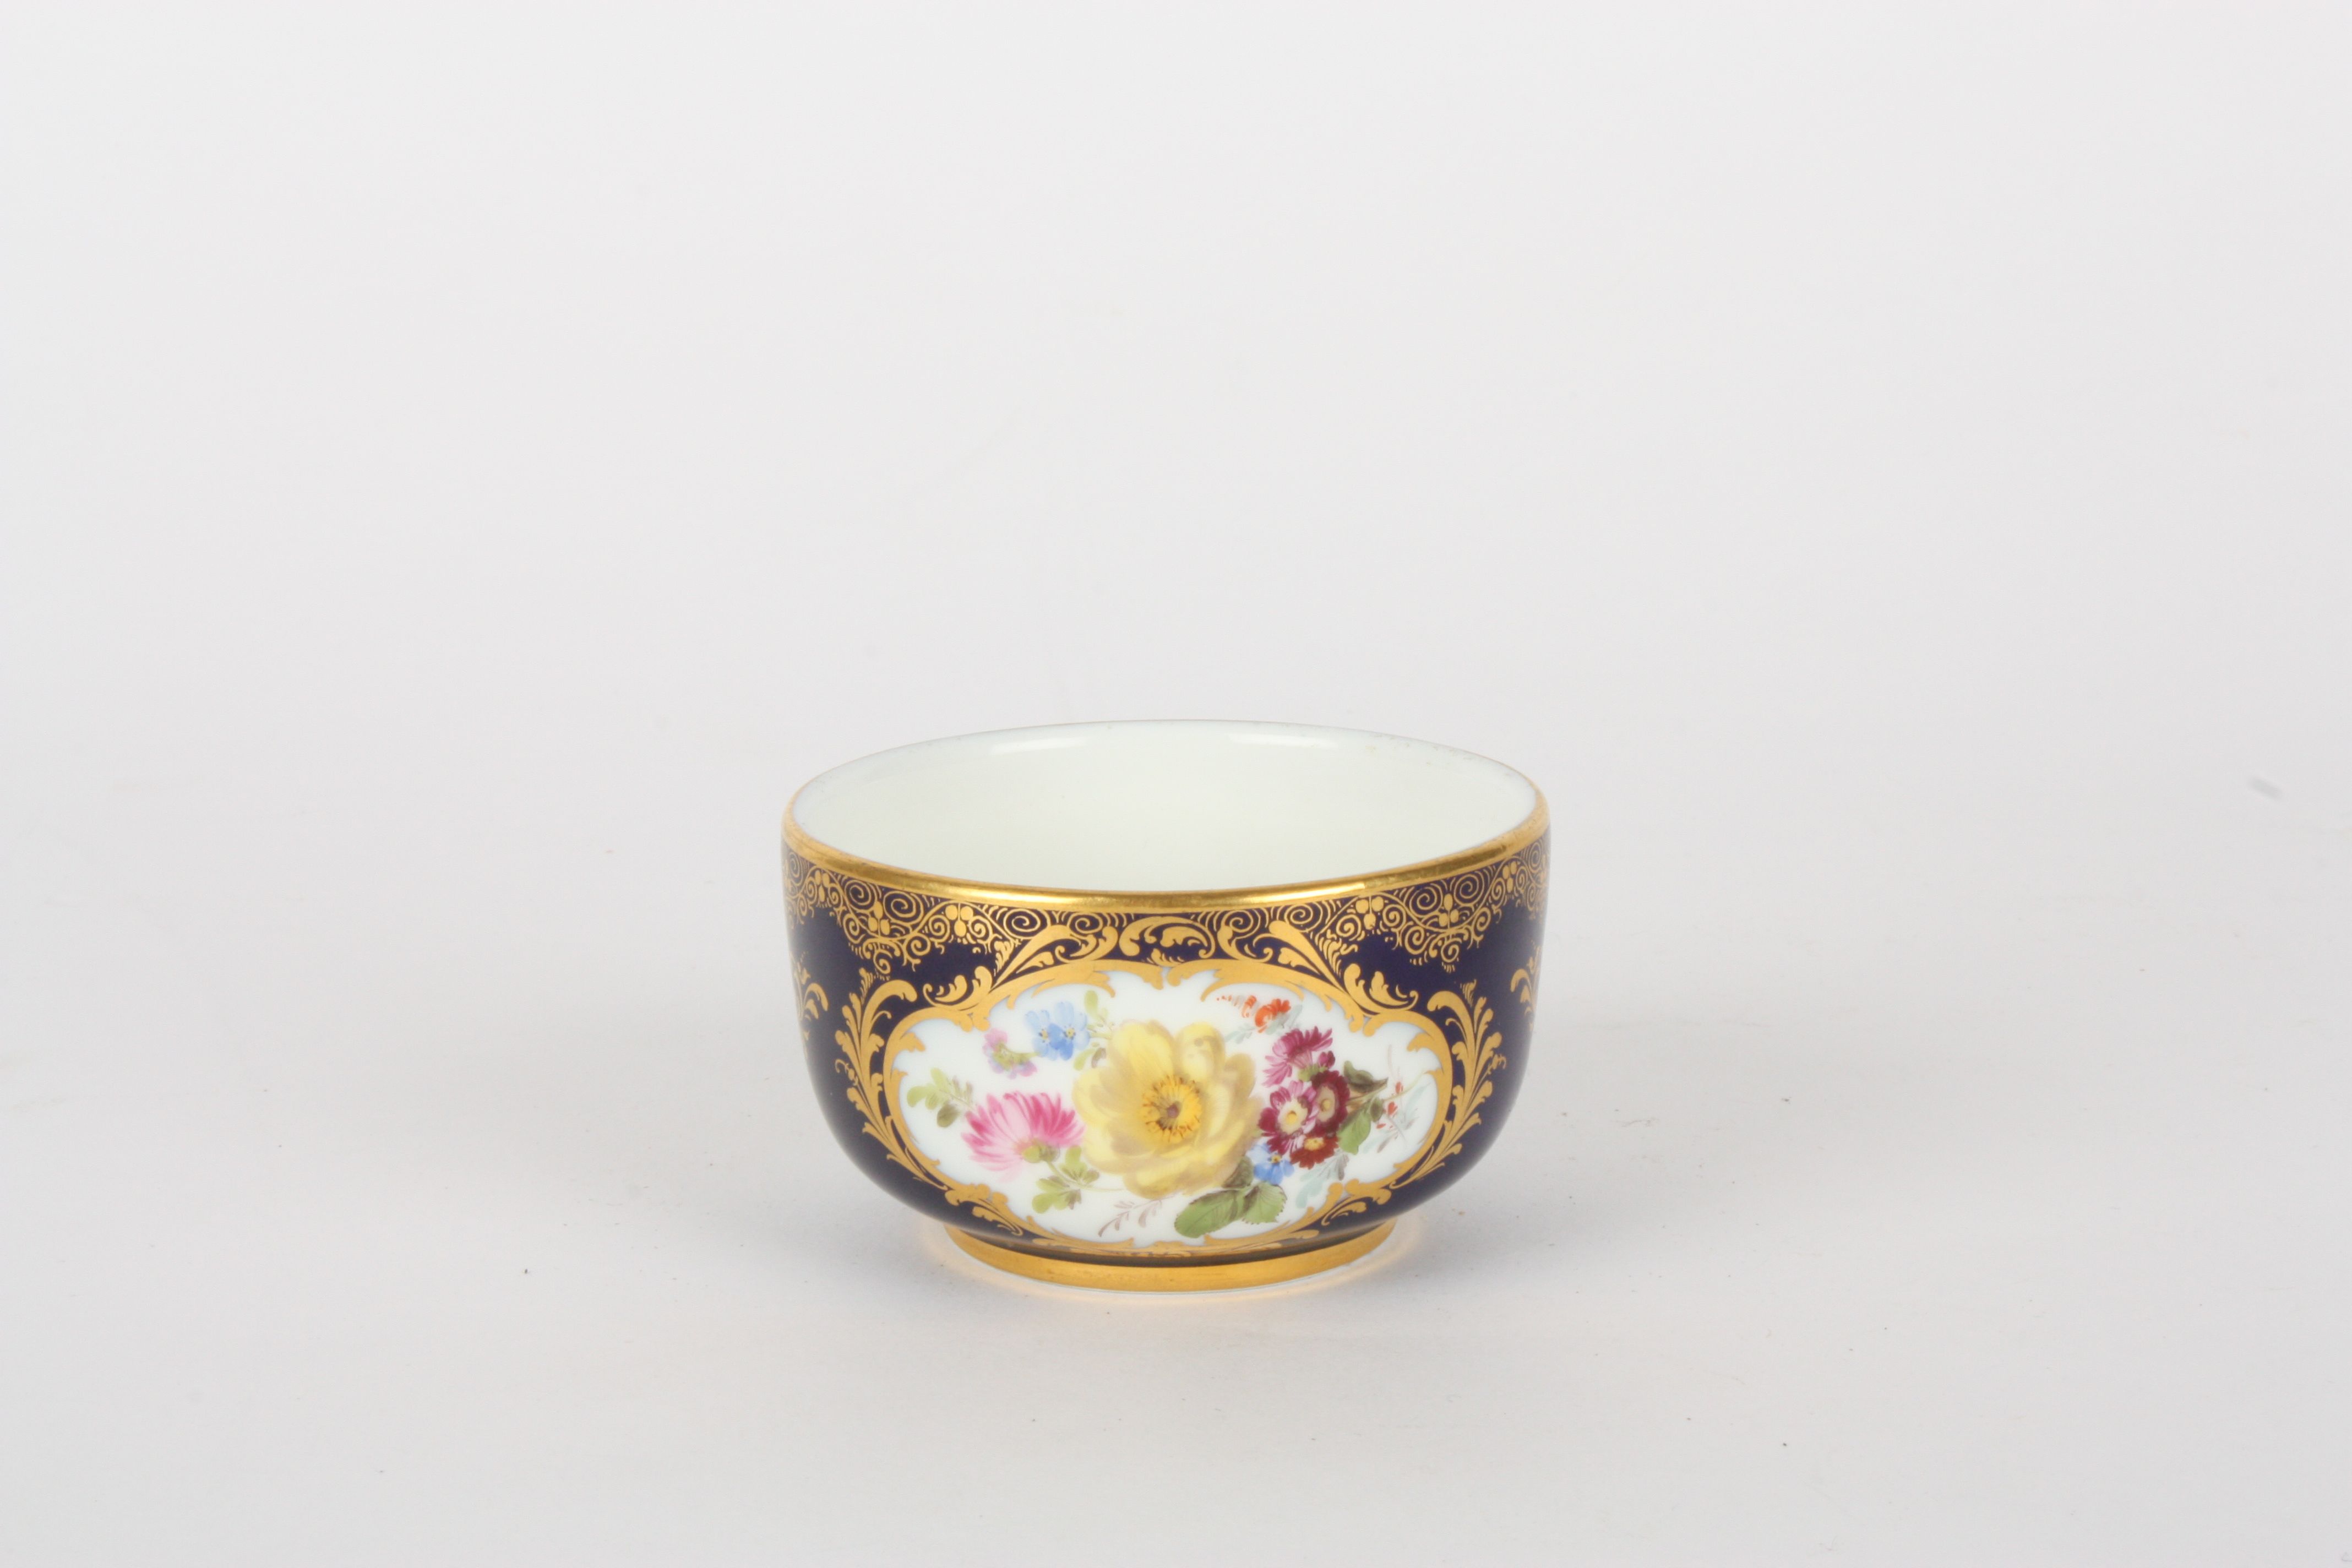 Late 20th century Meissen small sugar bowl, painted with panels of flowers and companion and